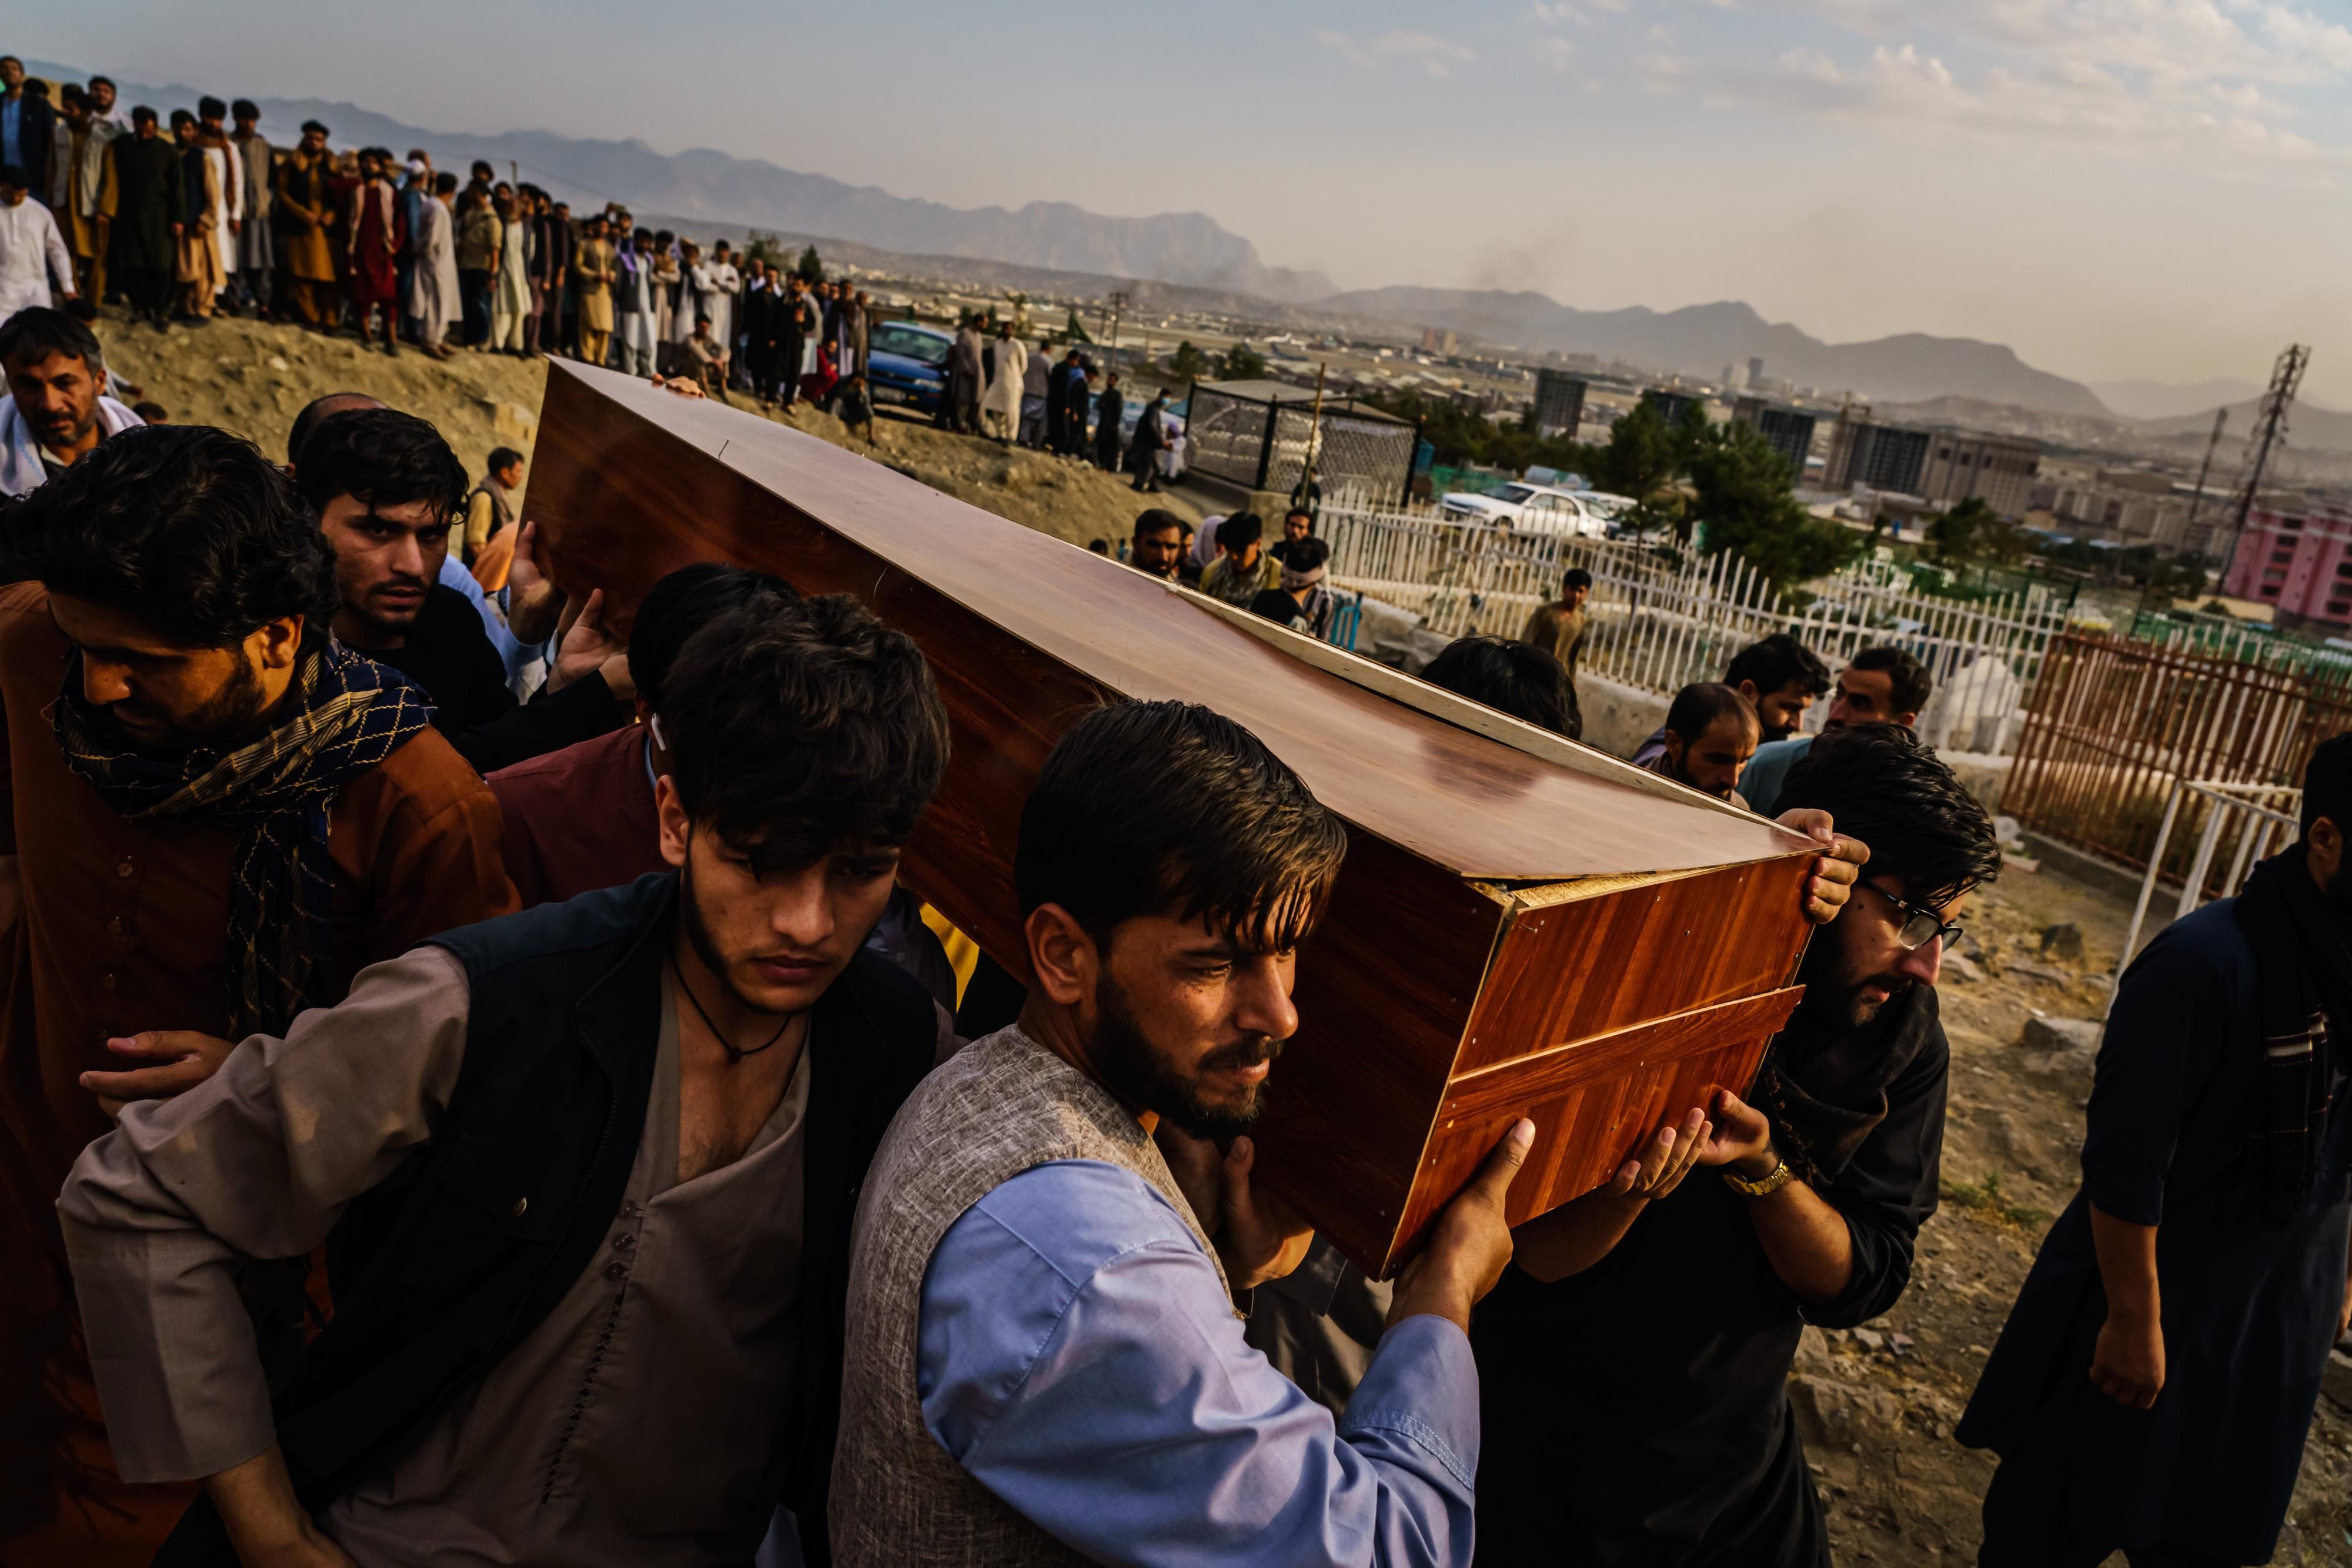 Caskets for the dead are carried towards the gravesite as relatives and friends attend a mass funeral for members of a family that is said to have been killed in a U.S. drone airstrike, in Kabul, Afghanistan, Monday, Aug. 30, 2021.